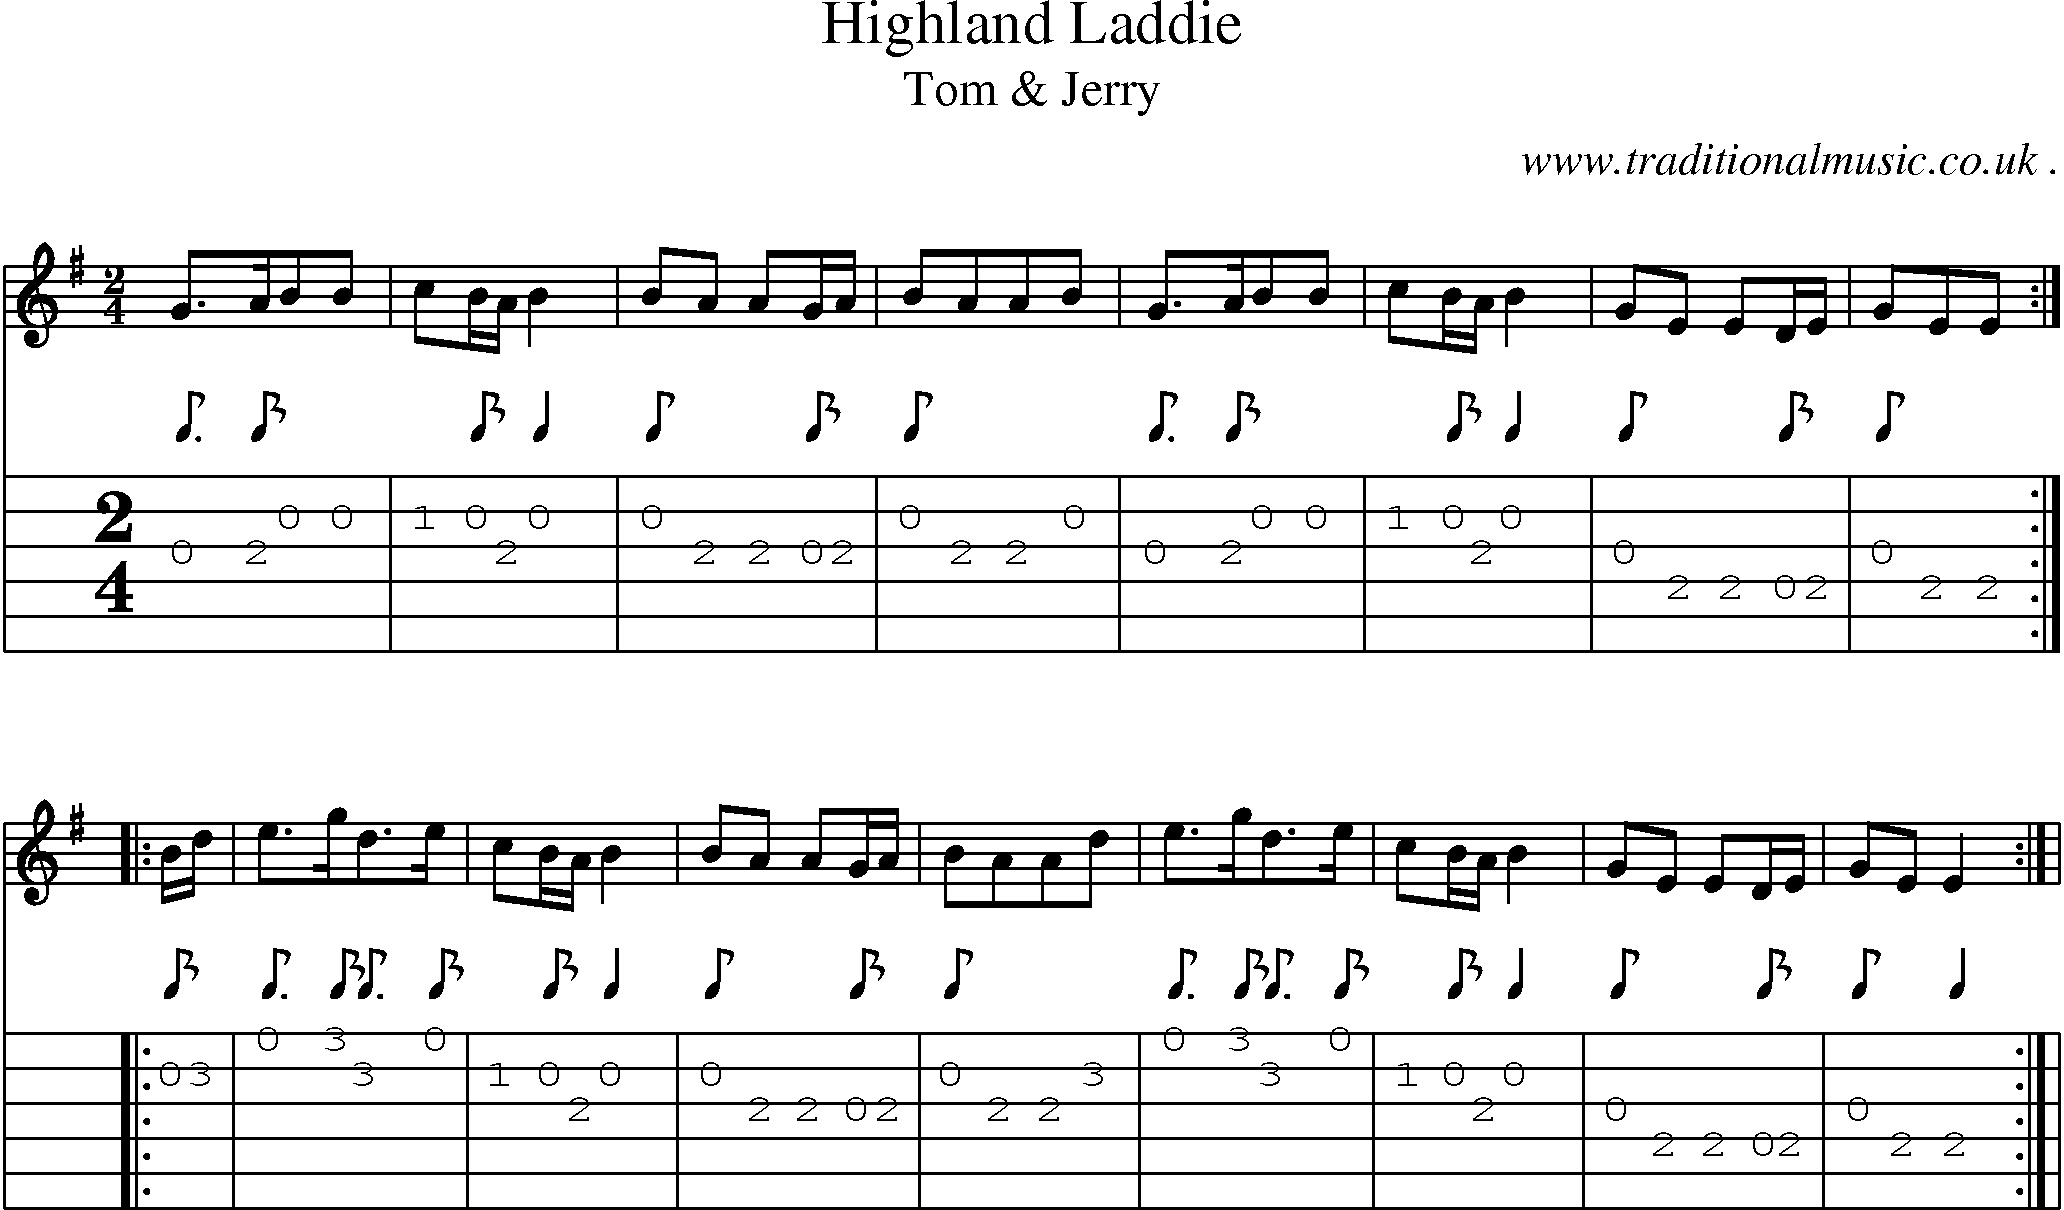 Sheet-Music and Guitar Tabs for Highland Laddie